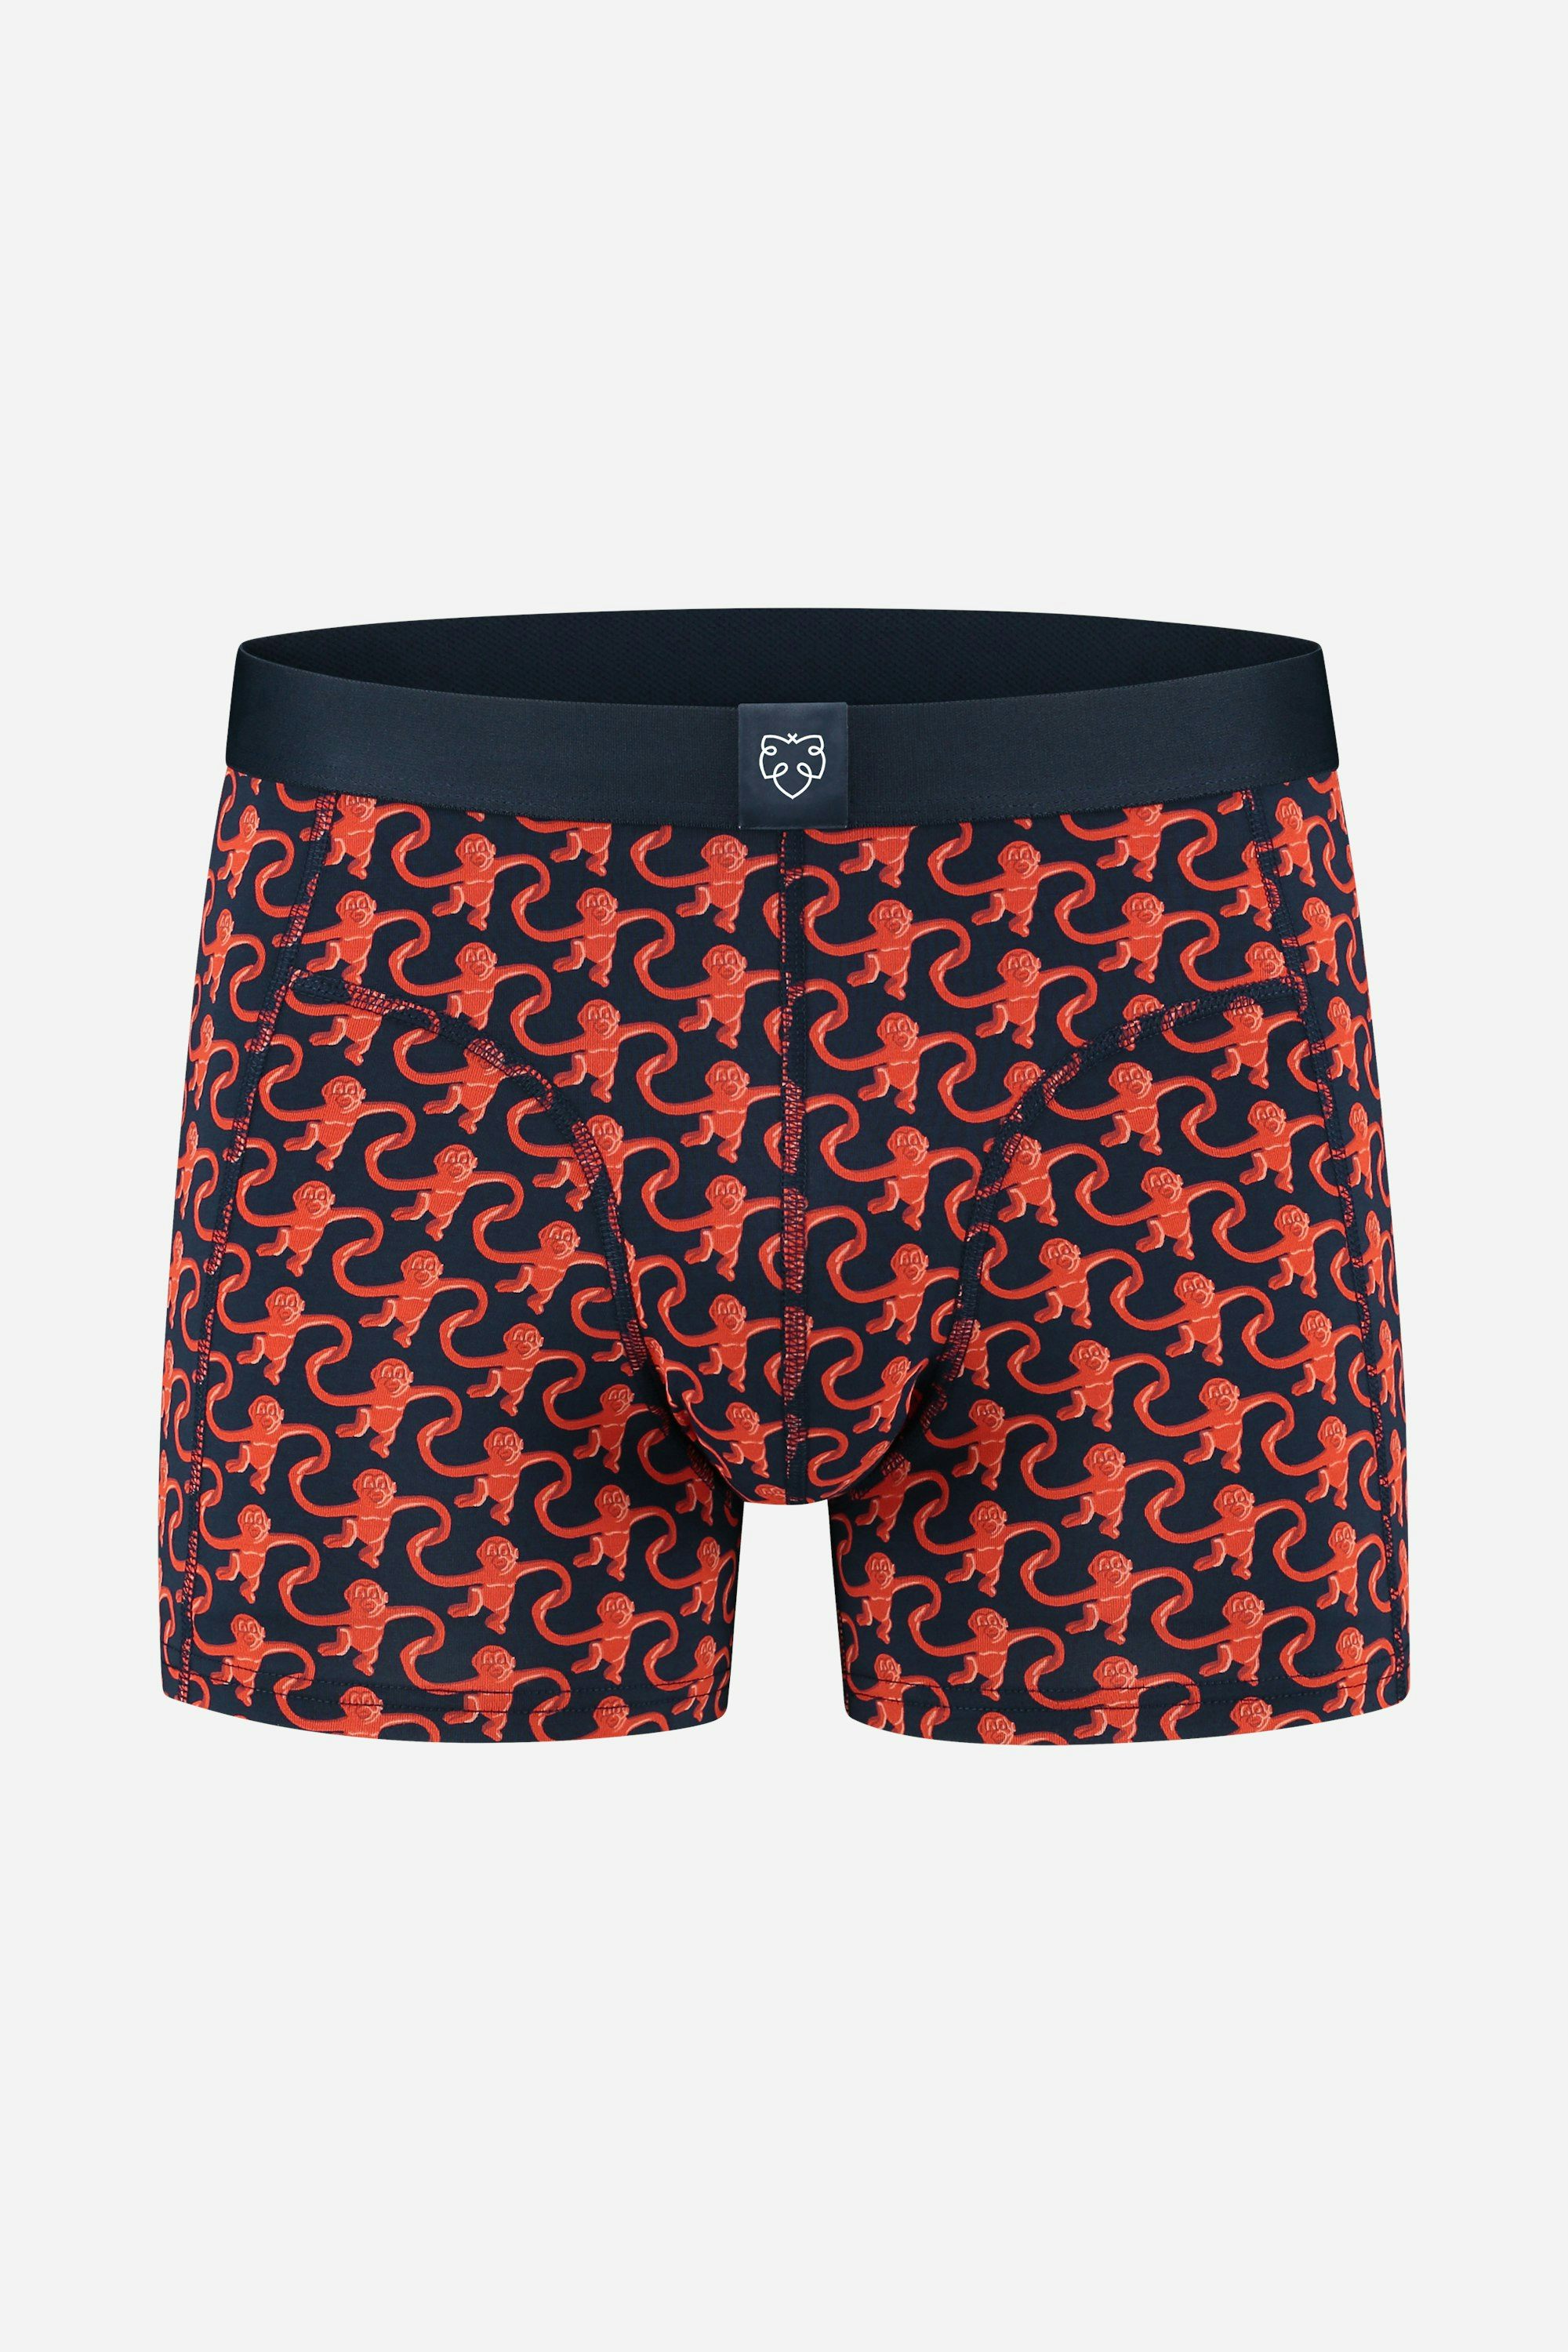 A-dam blue boxer briefs with monkeys print from pure organic